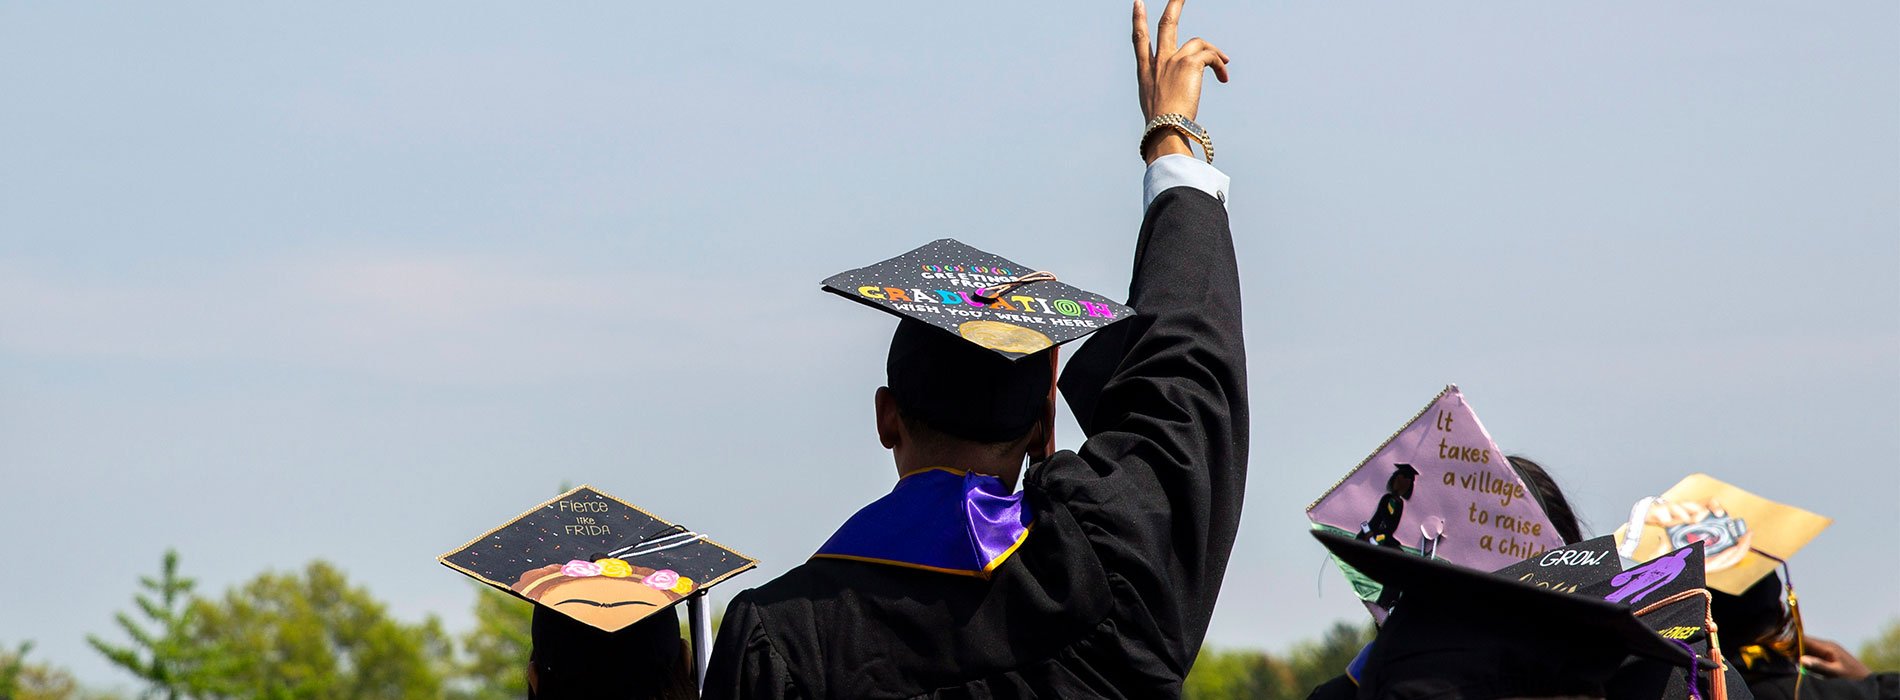 A graduate raises his hand with his back to the camera.